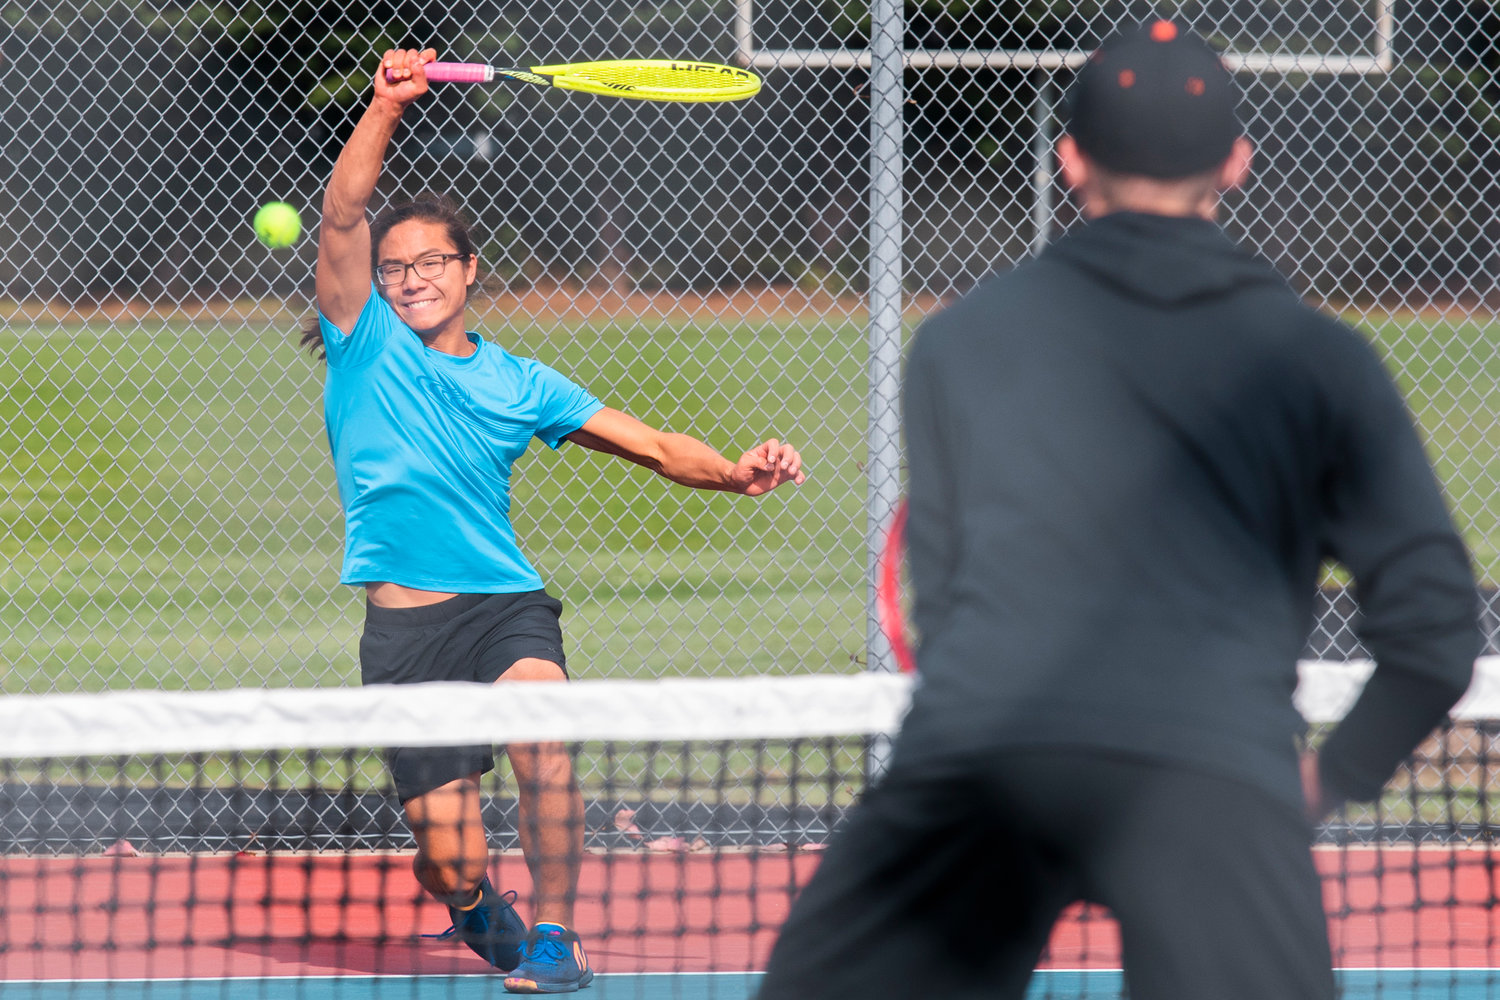 W.F. West’s Joseph Chung smiles as he returns a shot during a doubles match at Black Hills High School Tuesday afternoon.